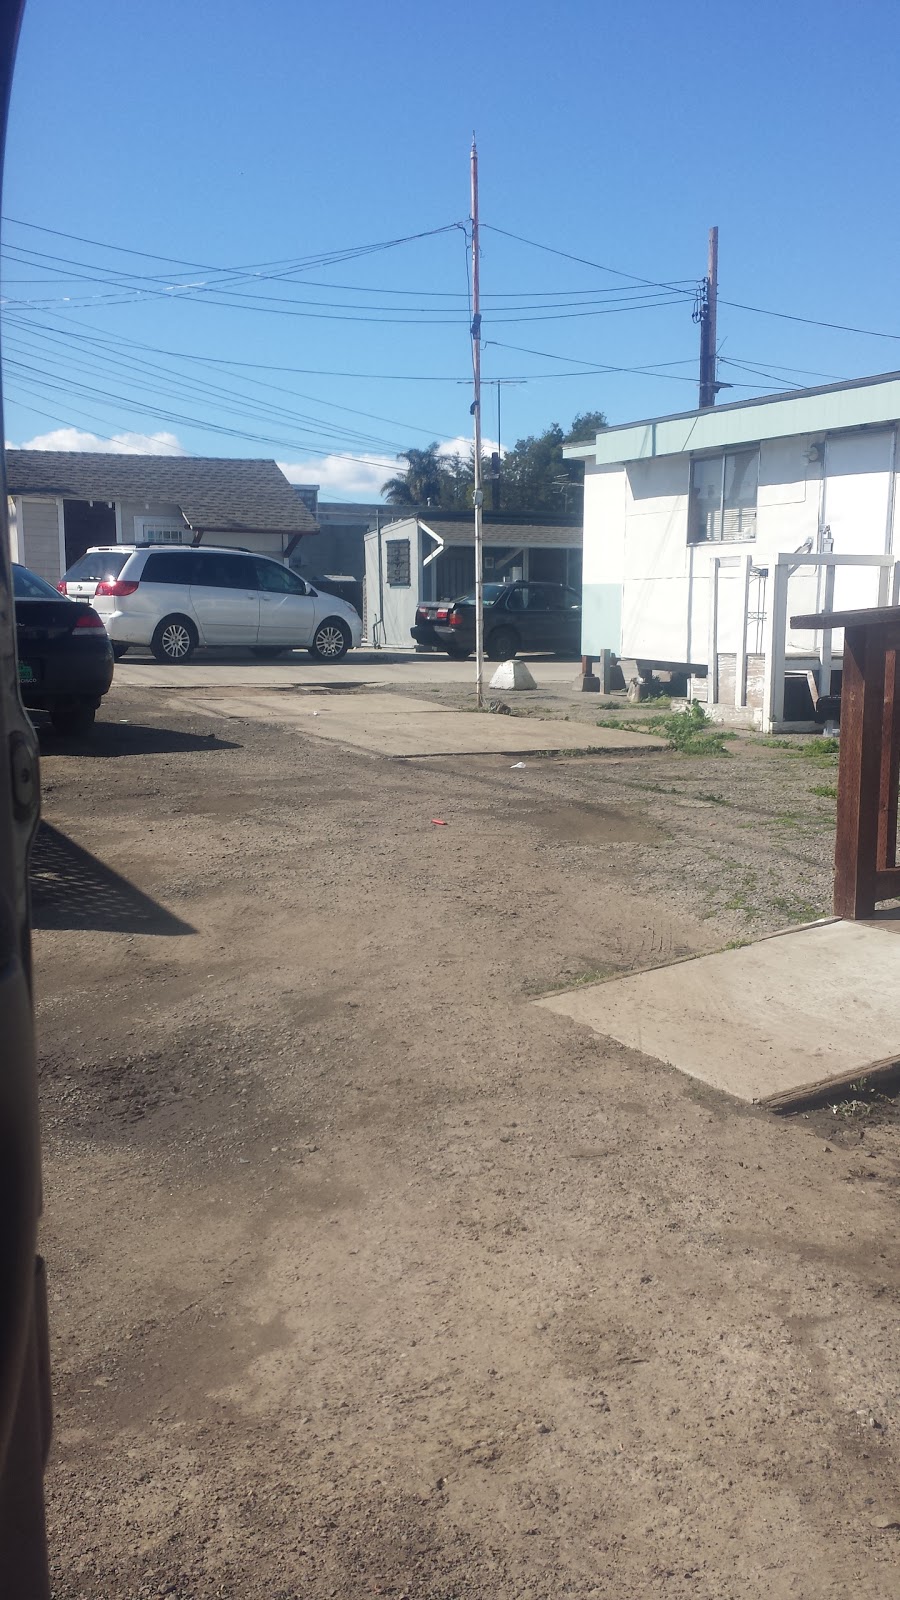 Crawfords Trailer Park | 1525 105th Ave, Oakland, CA 94603 | Phone: (510) 562-7009